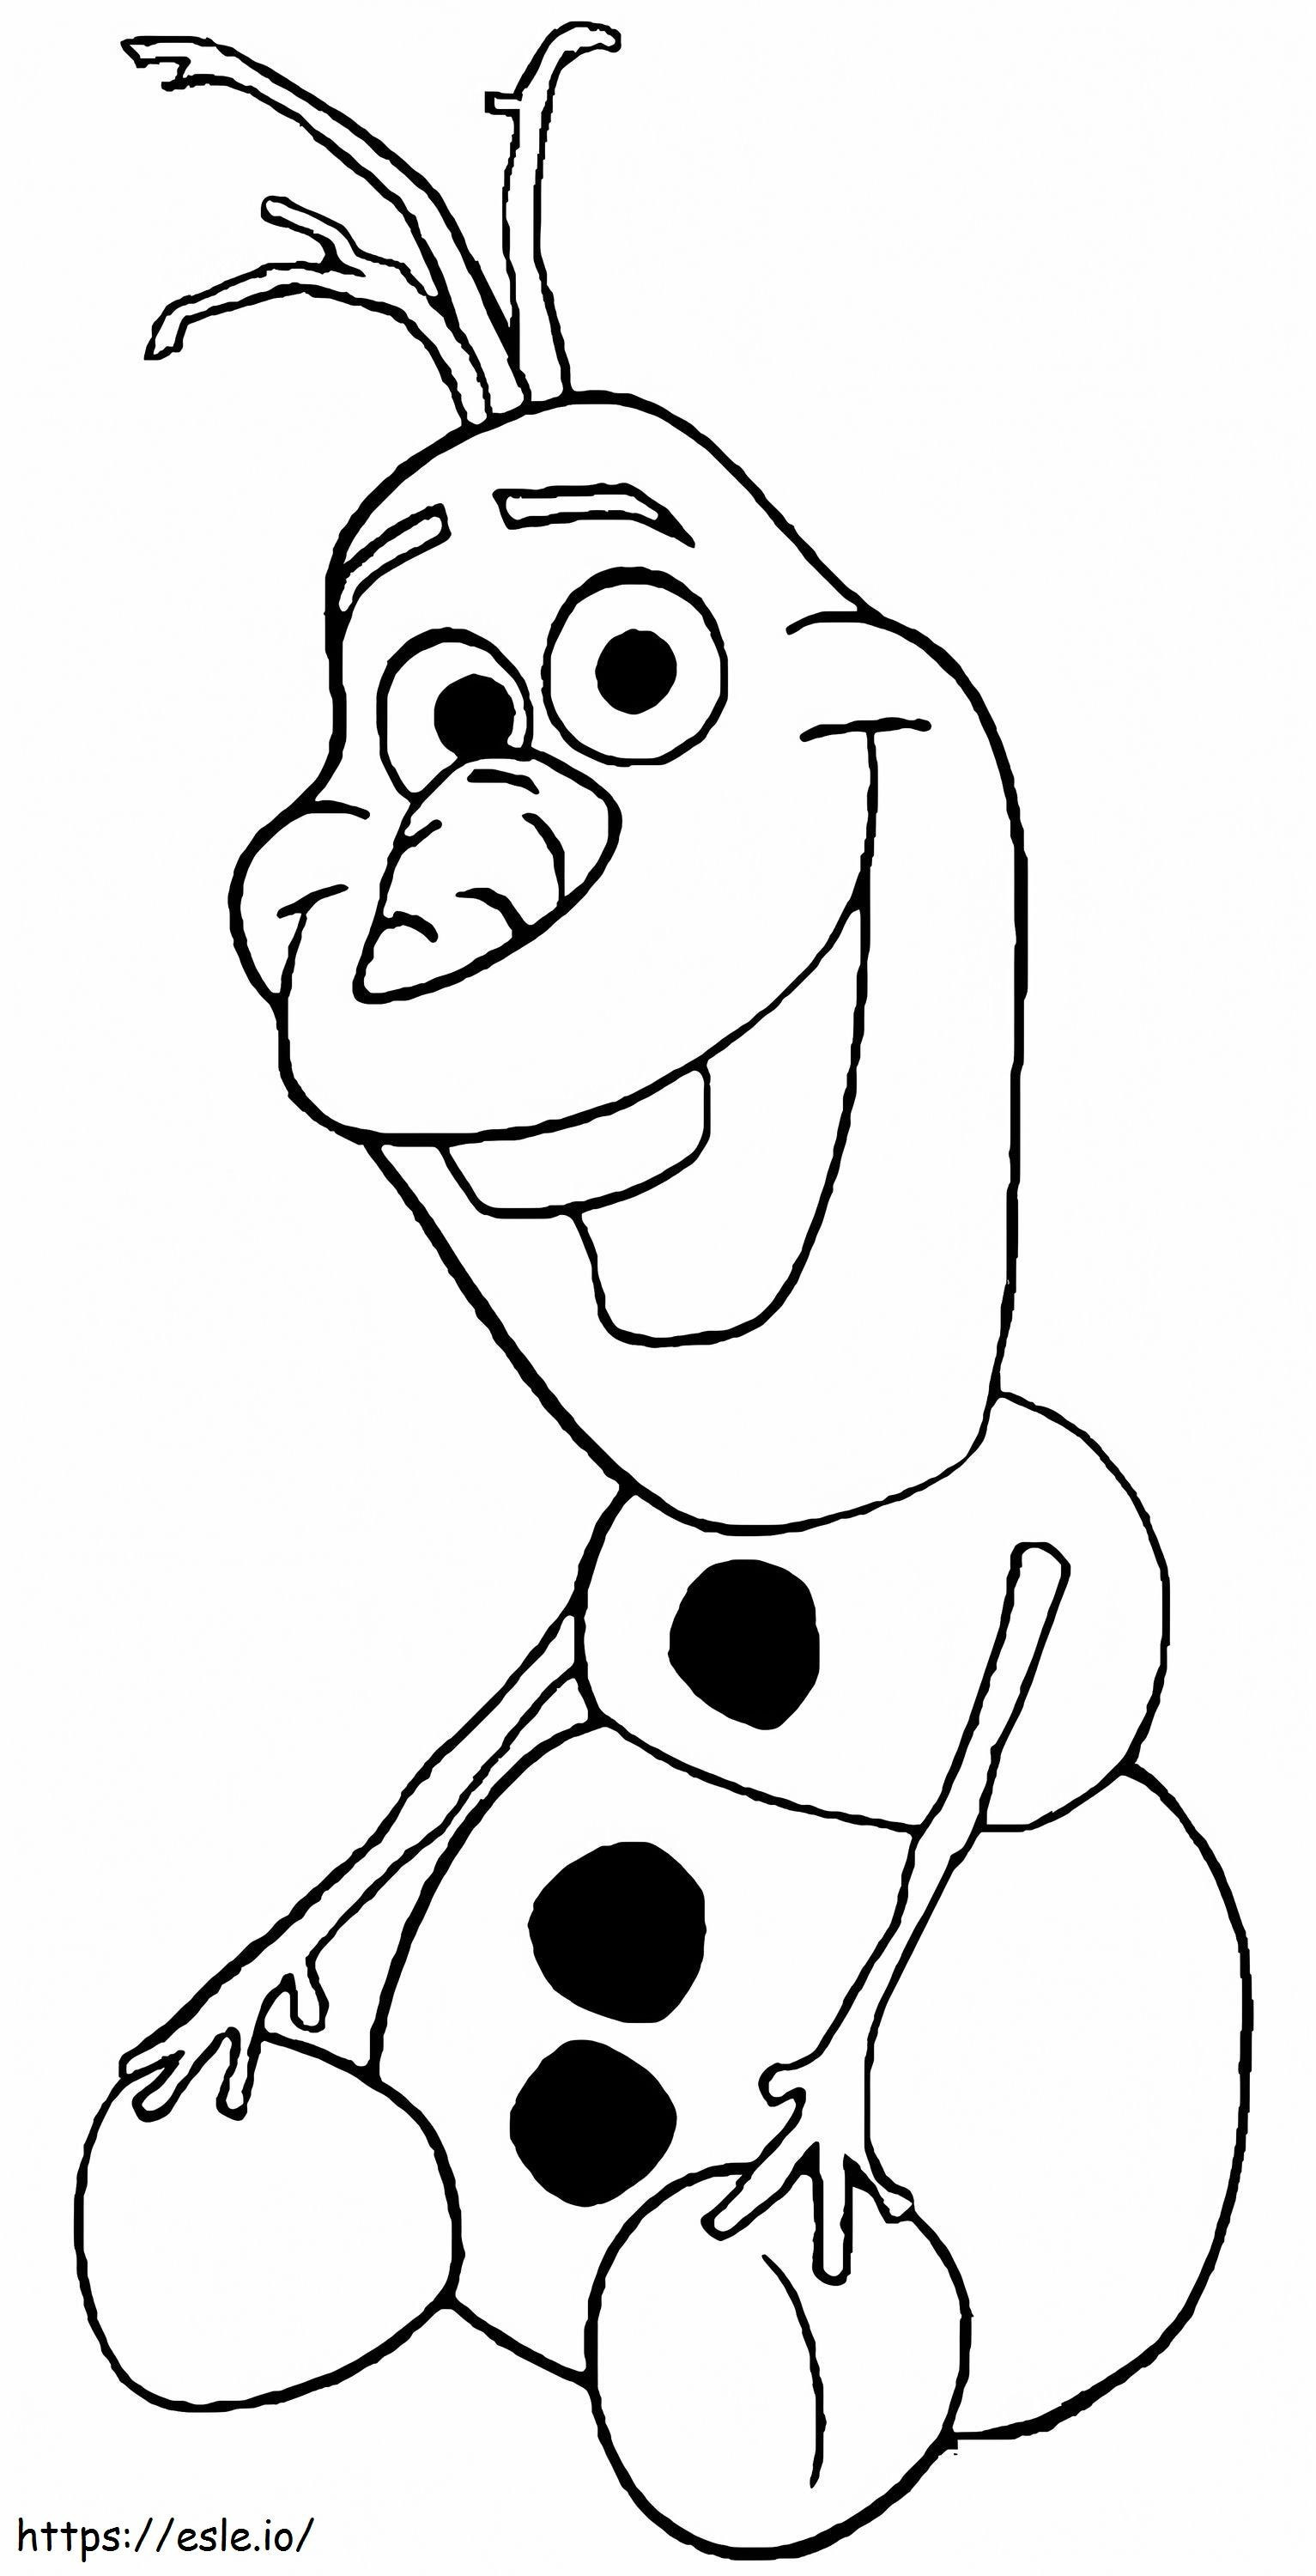 1539749413 Frozen Olaf Elsa For Kids 21 coloring page